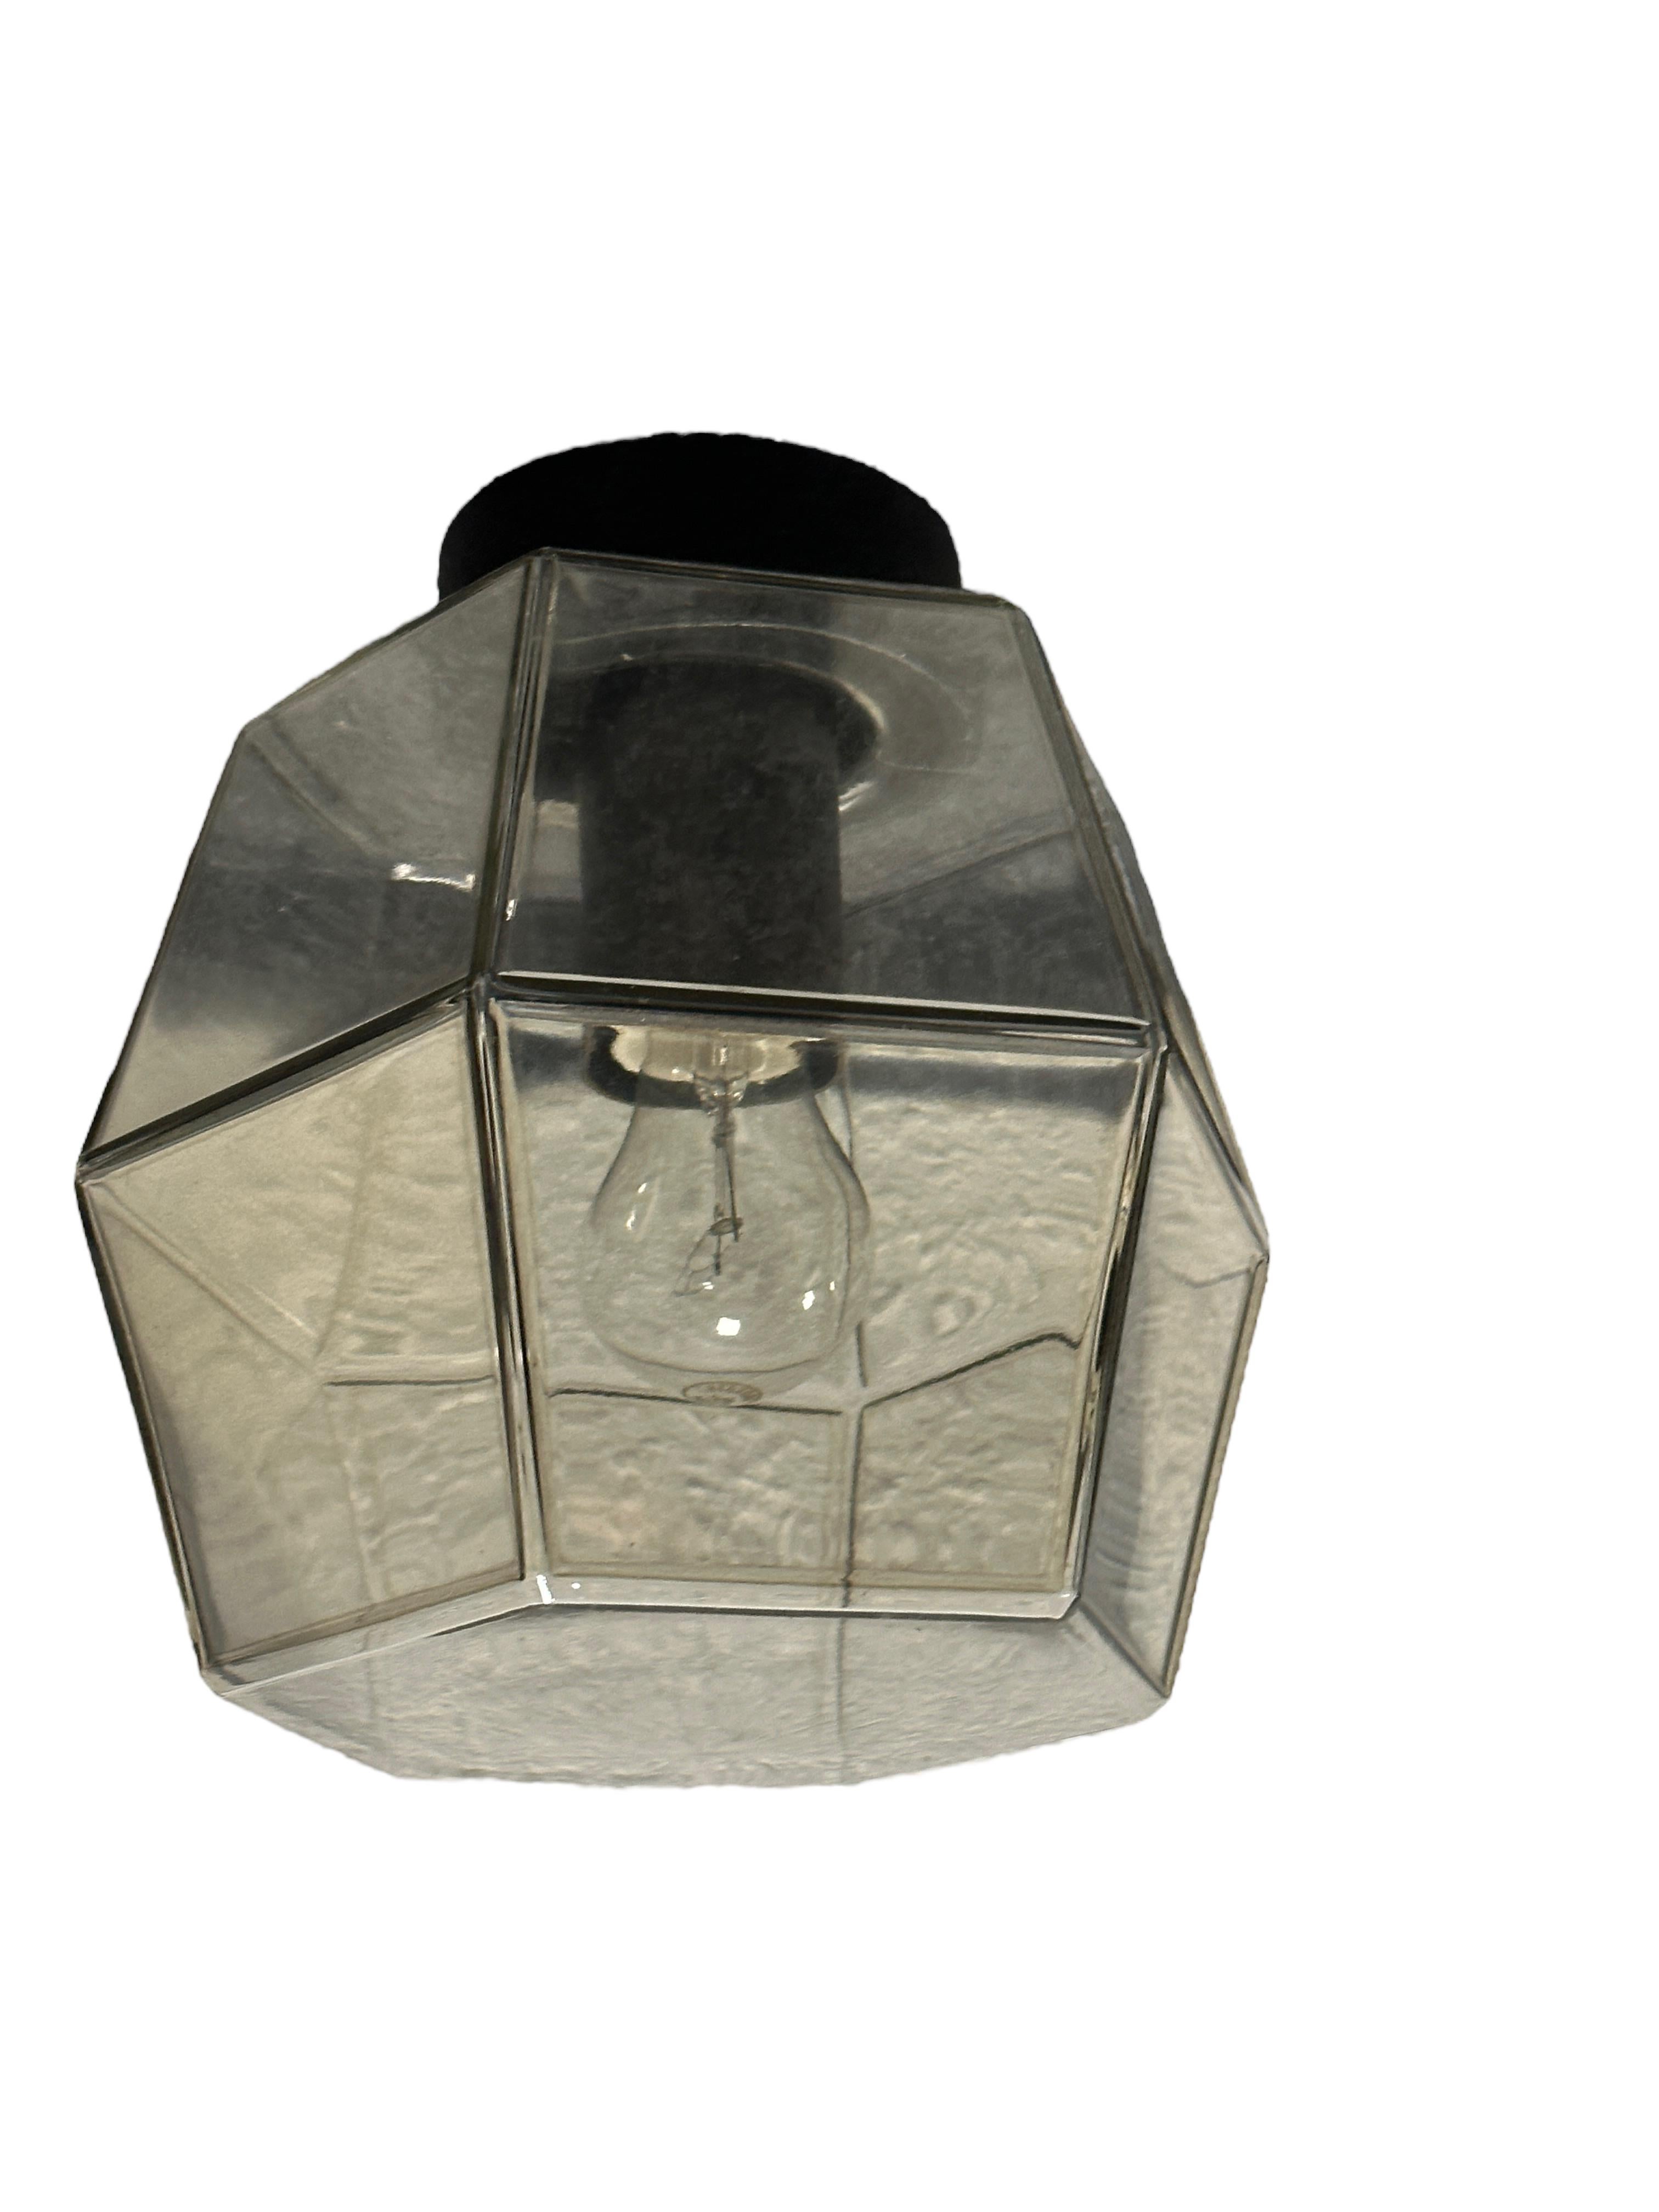 Metal Hexagonal Smoked Glass Flush Mount by RZB Leuchten Germany, 1970s For Sale